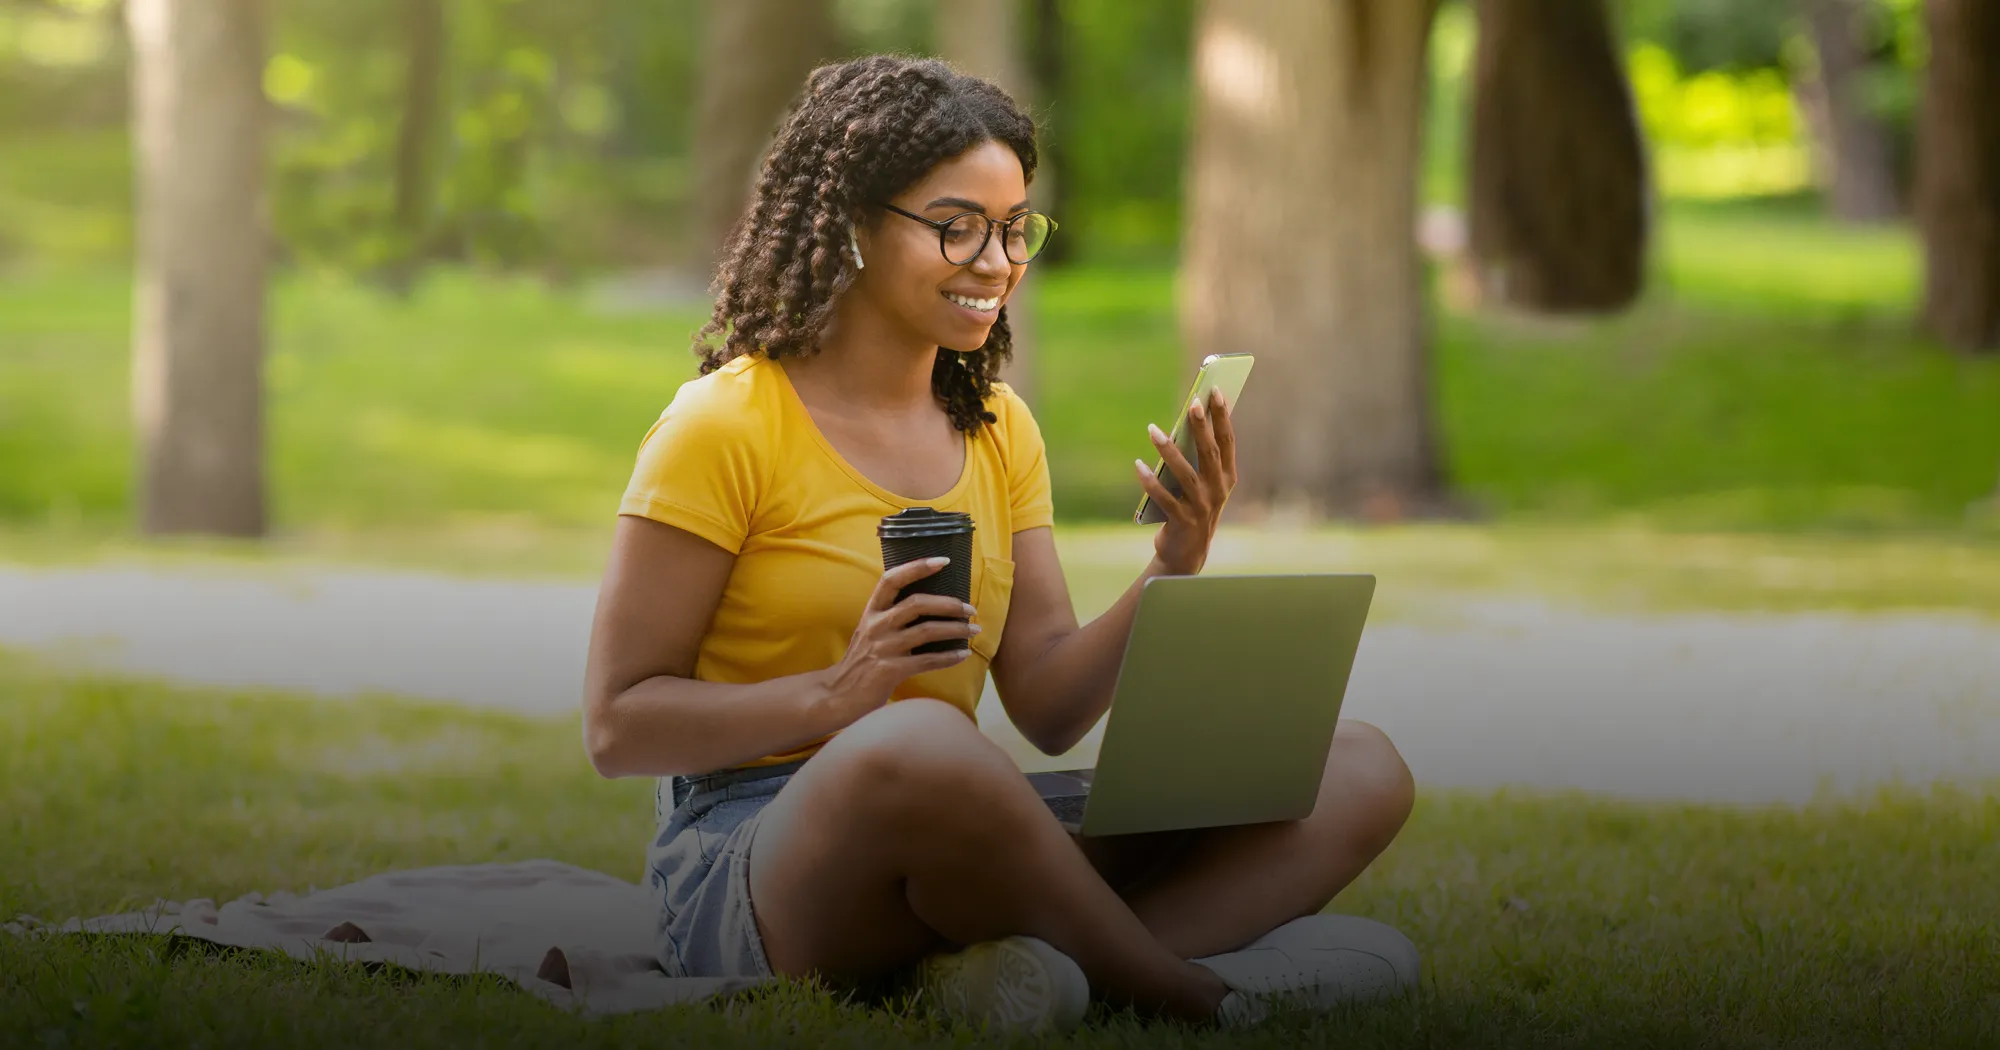 A woman relaxes outside on the grass while applying for summer classes on her phone